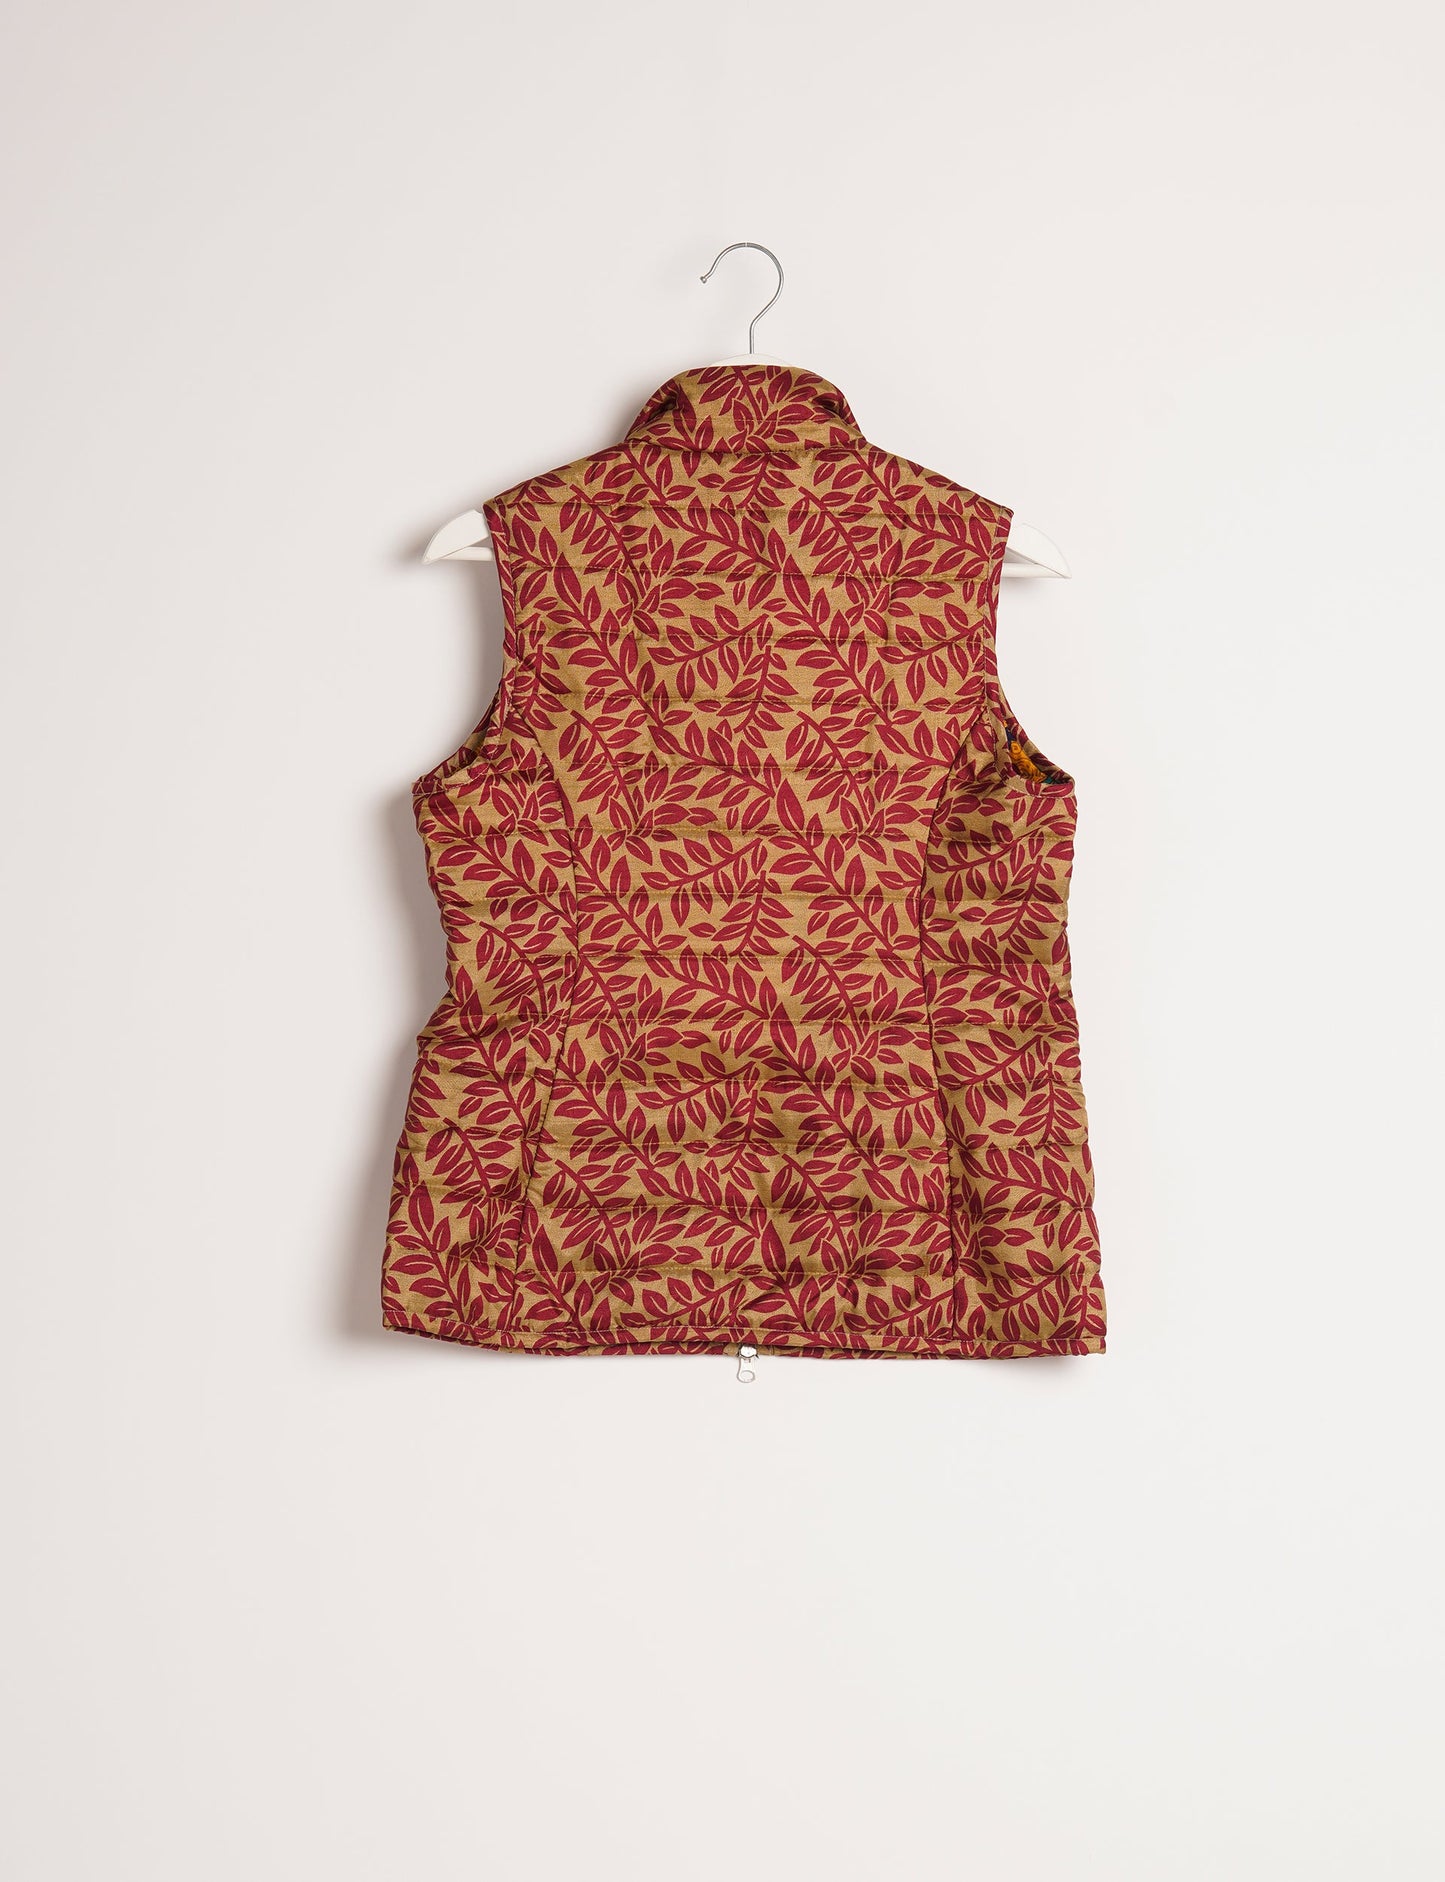 Elevate your style with our QUILTED GILET, crafted from upcycled tropical saris. This sleeveless jacket, with its quilted warmth, is perfect for layering over tees or sweaters. Choose ethical, green fashion and experience the comfort of sustainable living with a touch of home.